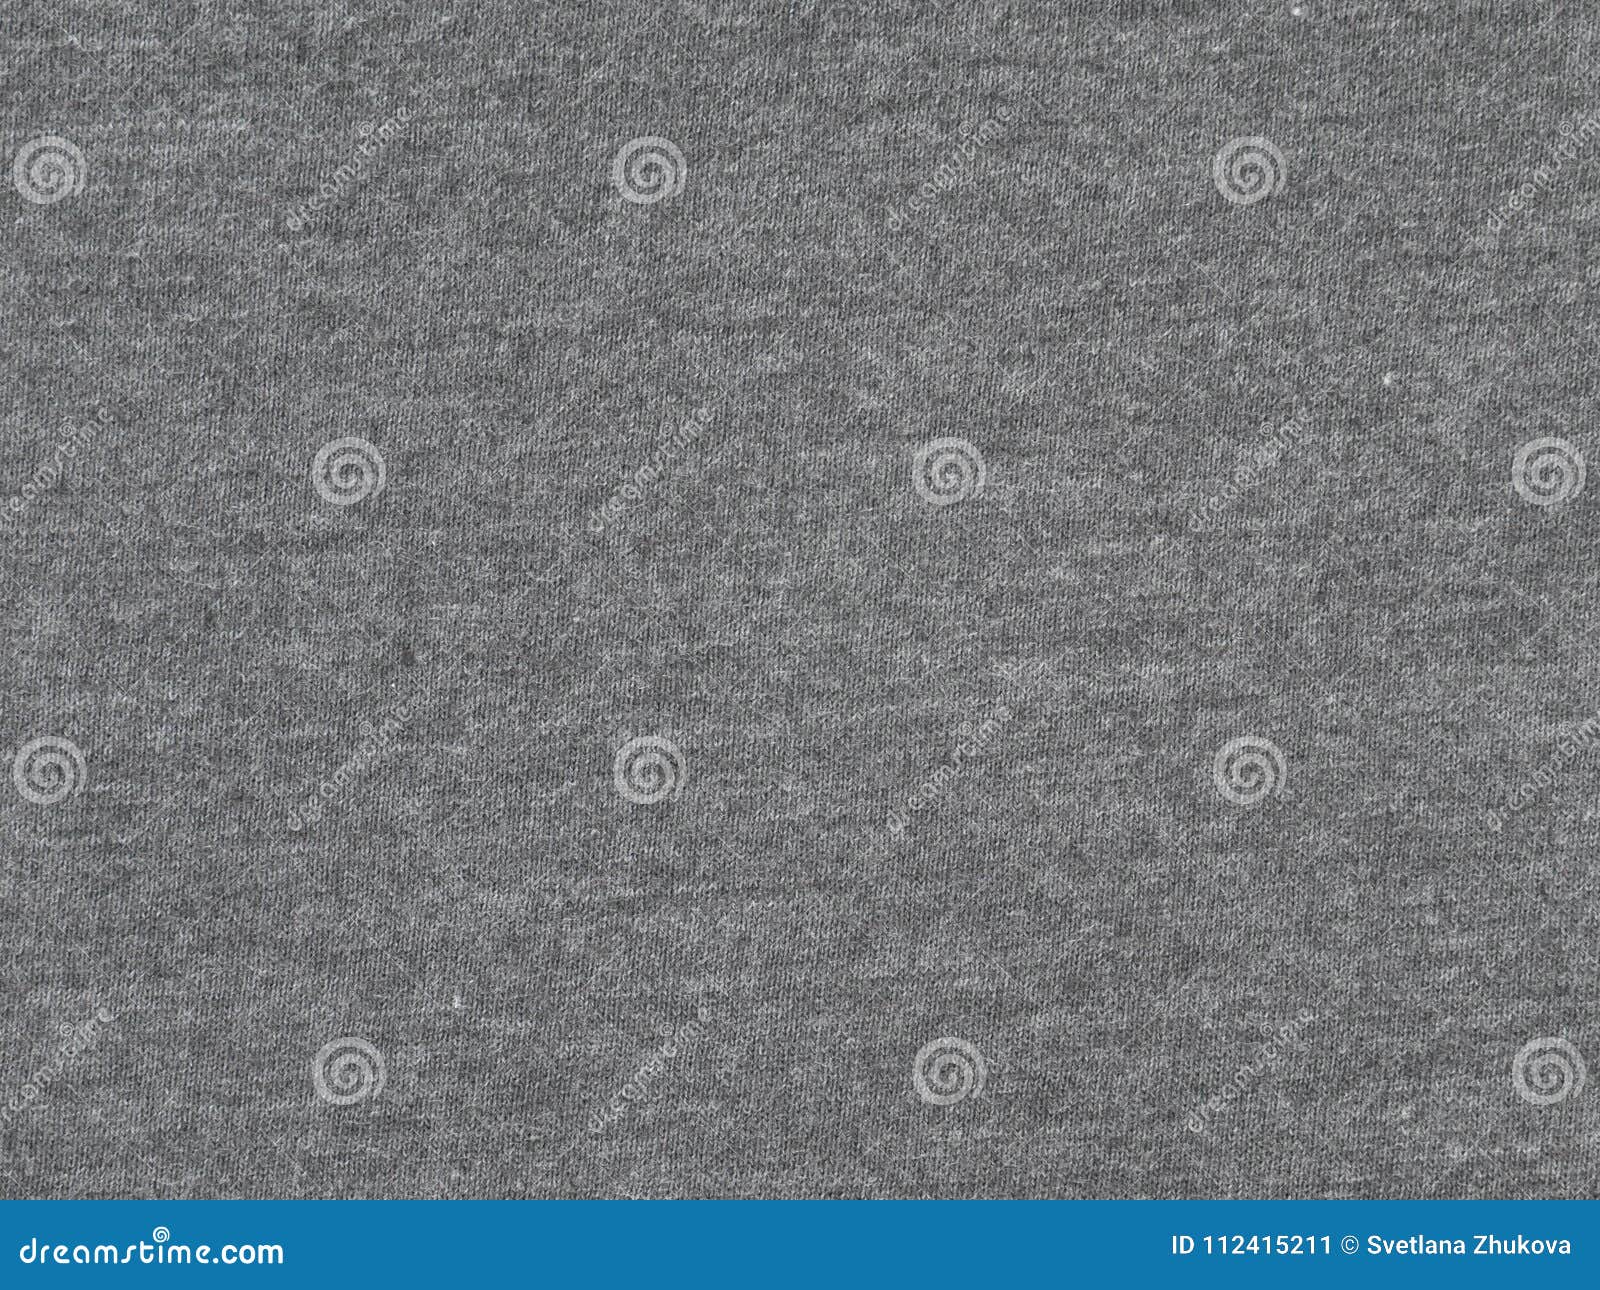 Heather Gray Tshirt Cotton Knitted Fabric Stock Photo - Download